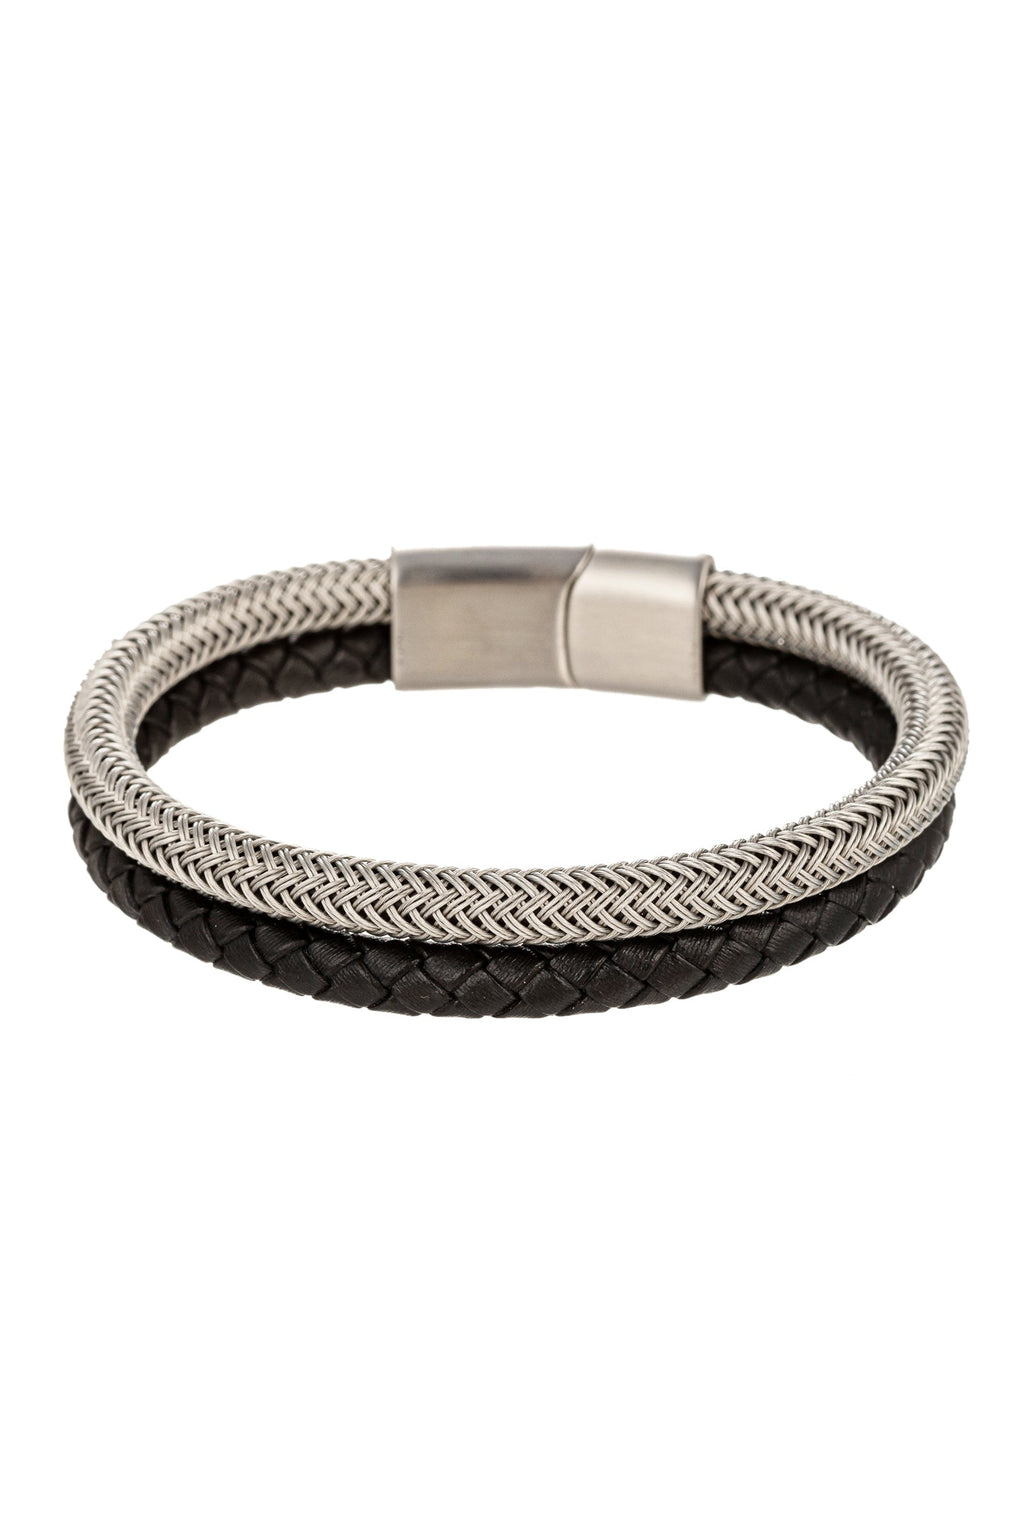 Add a Touch of Elegance with the Lucas 2 Tone Bracelet.